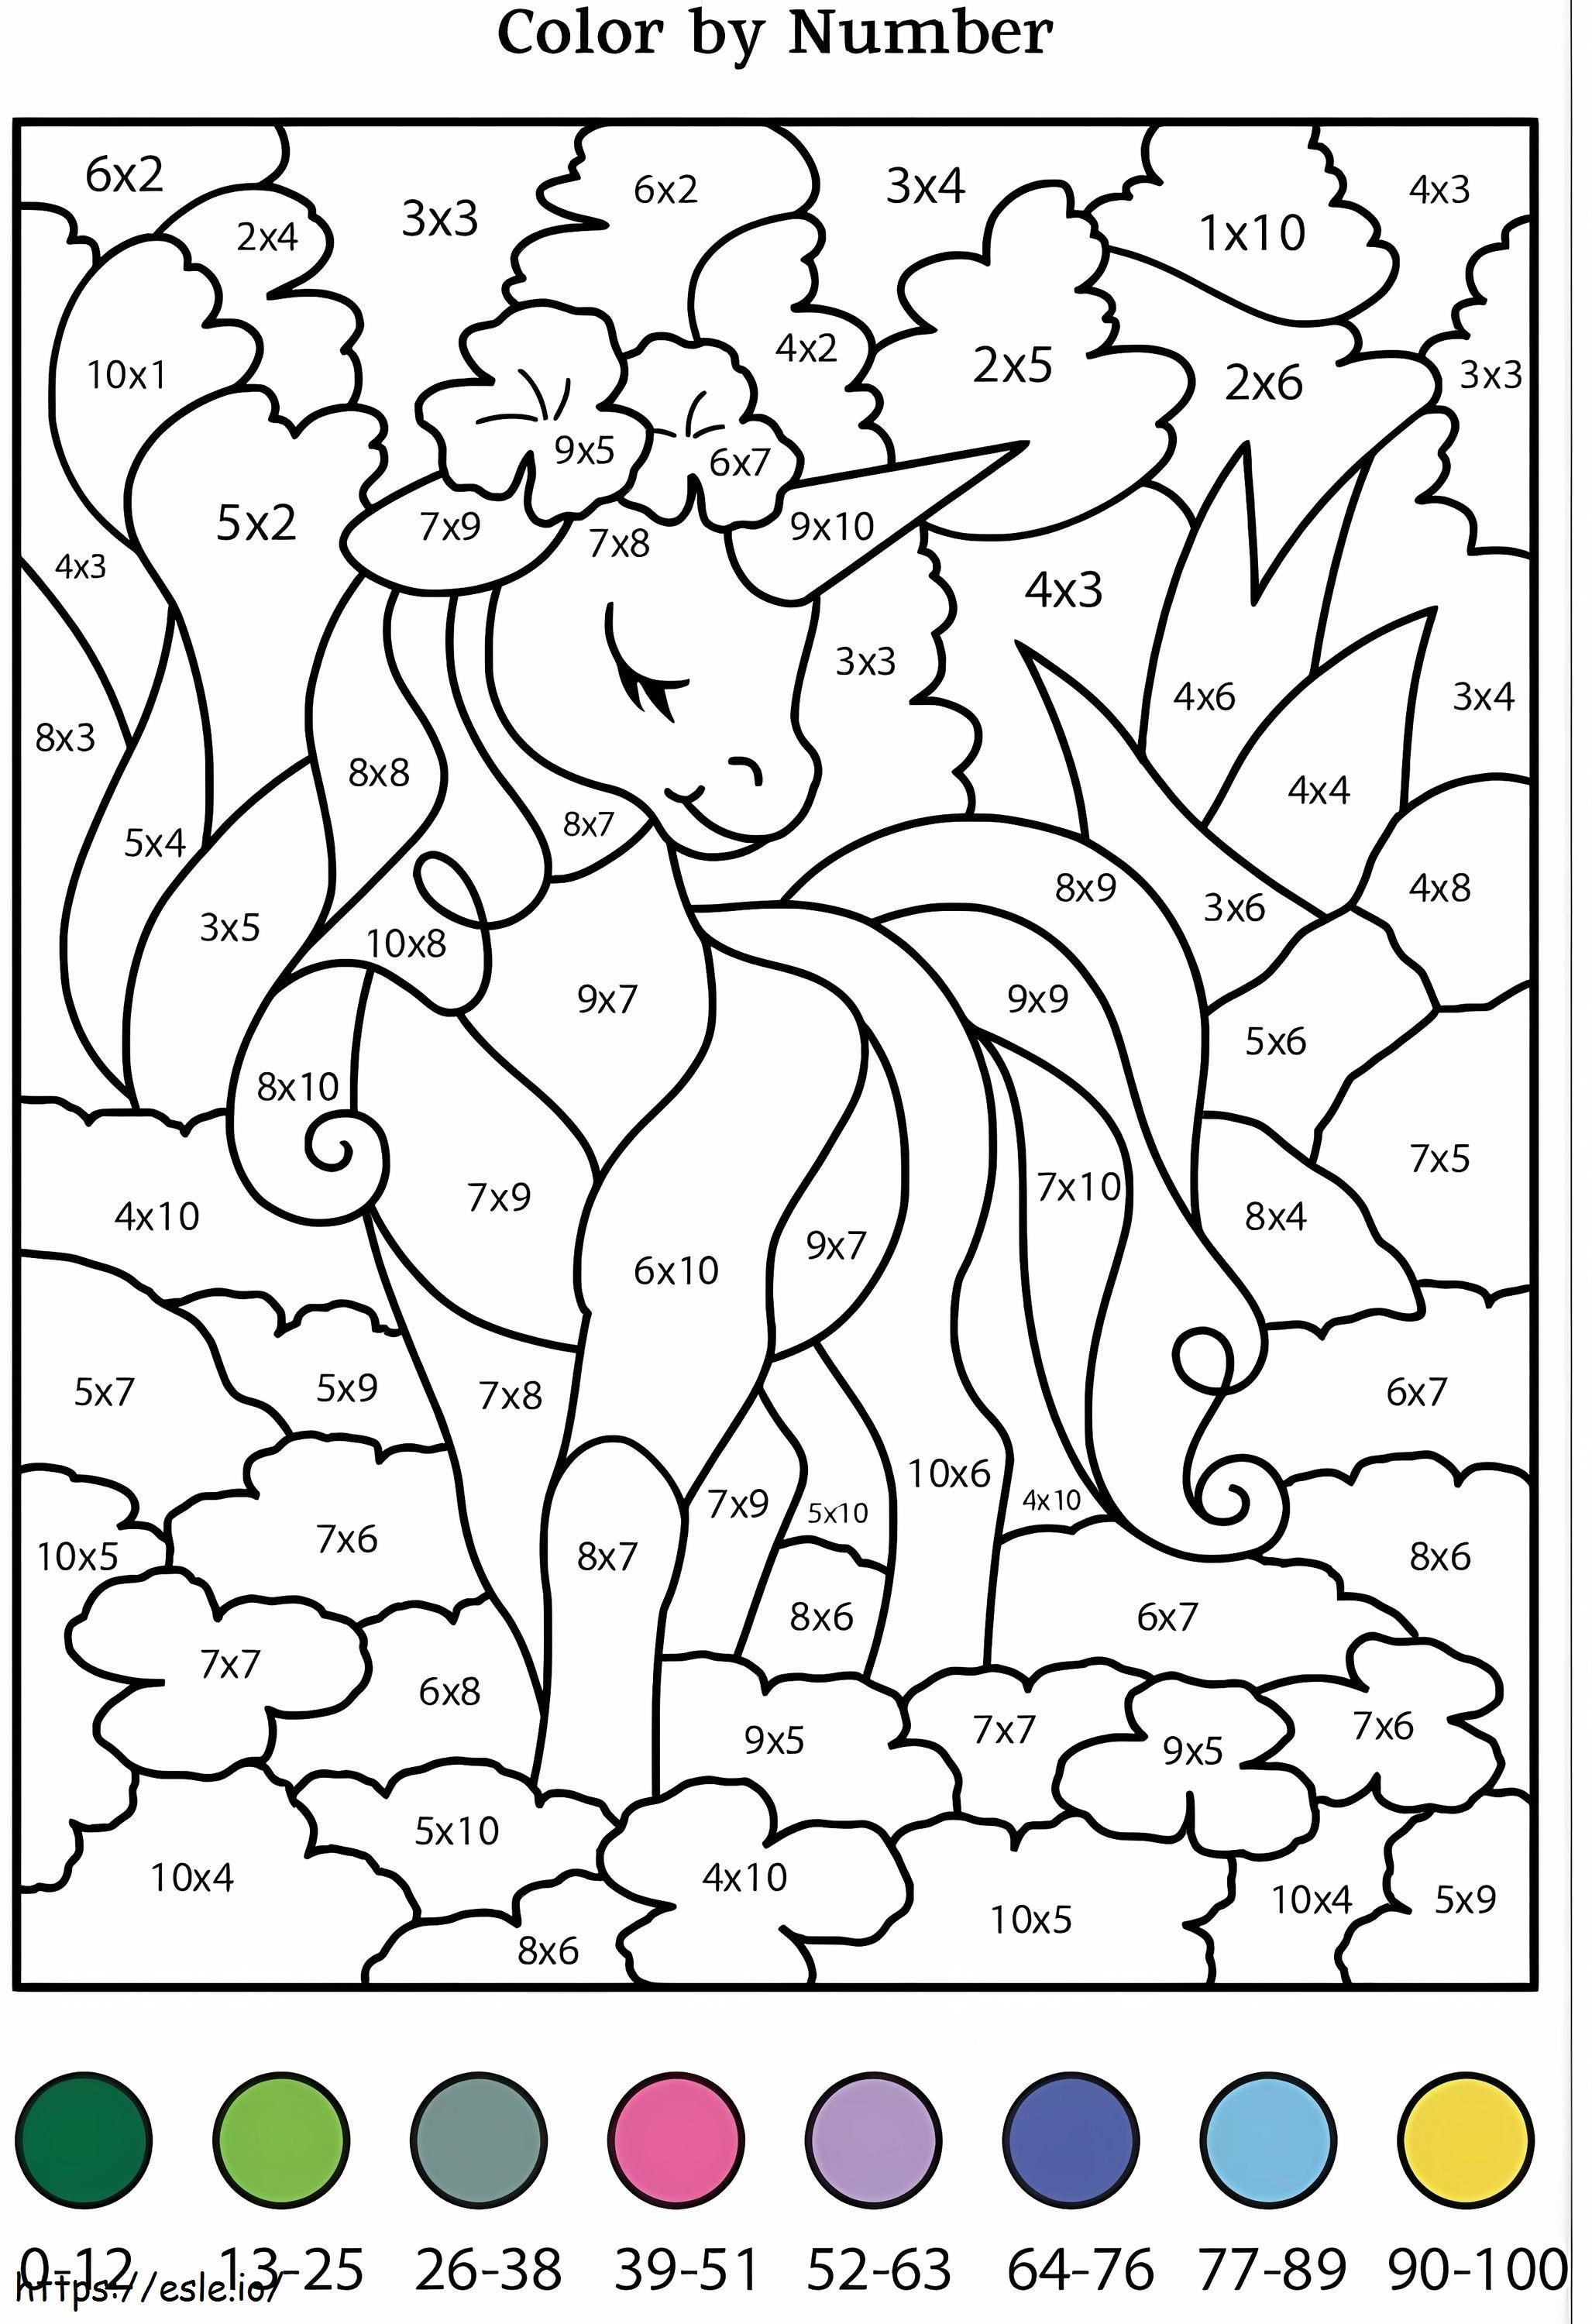 Loevly Unicorn Color By Number coloring page